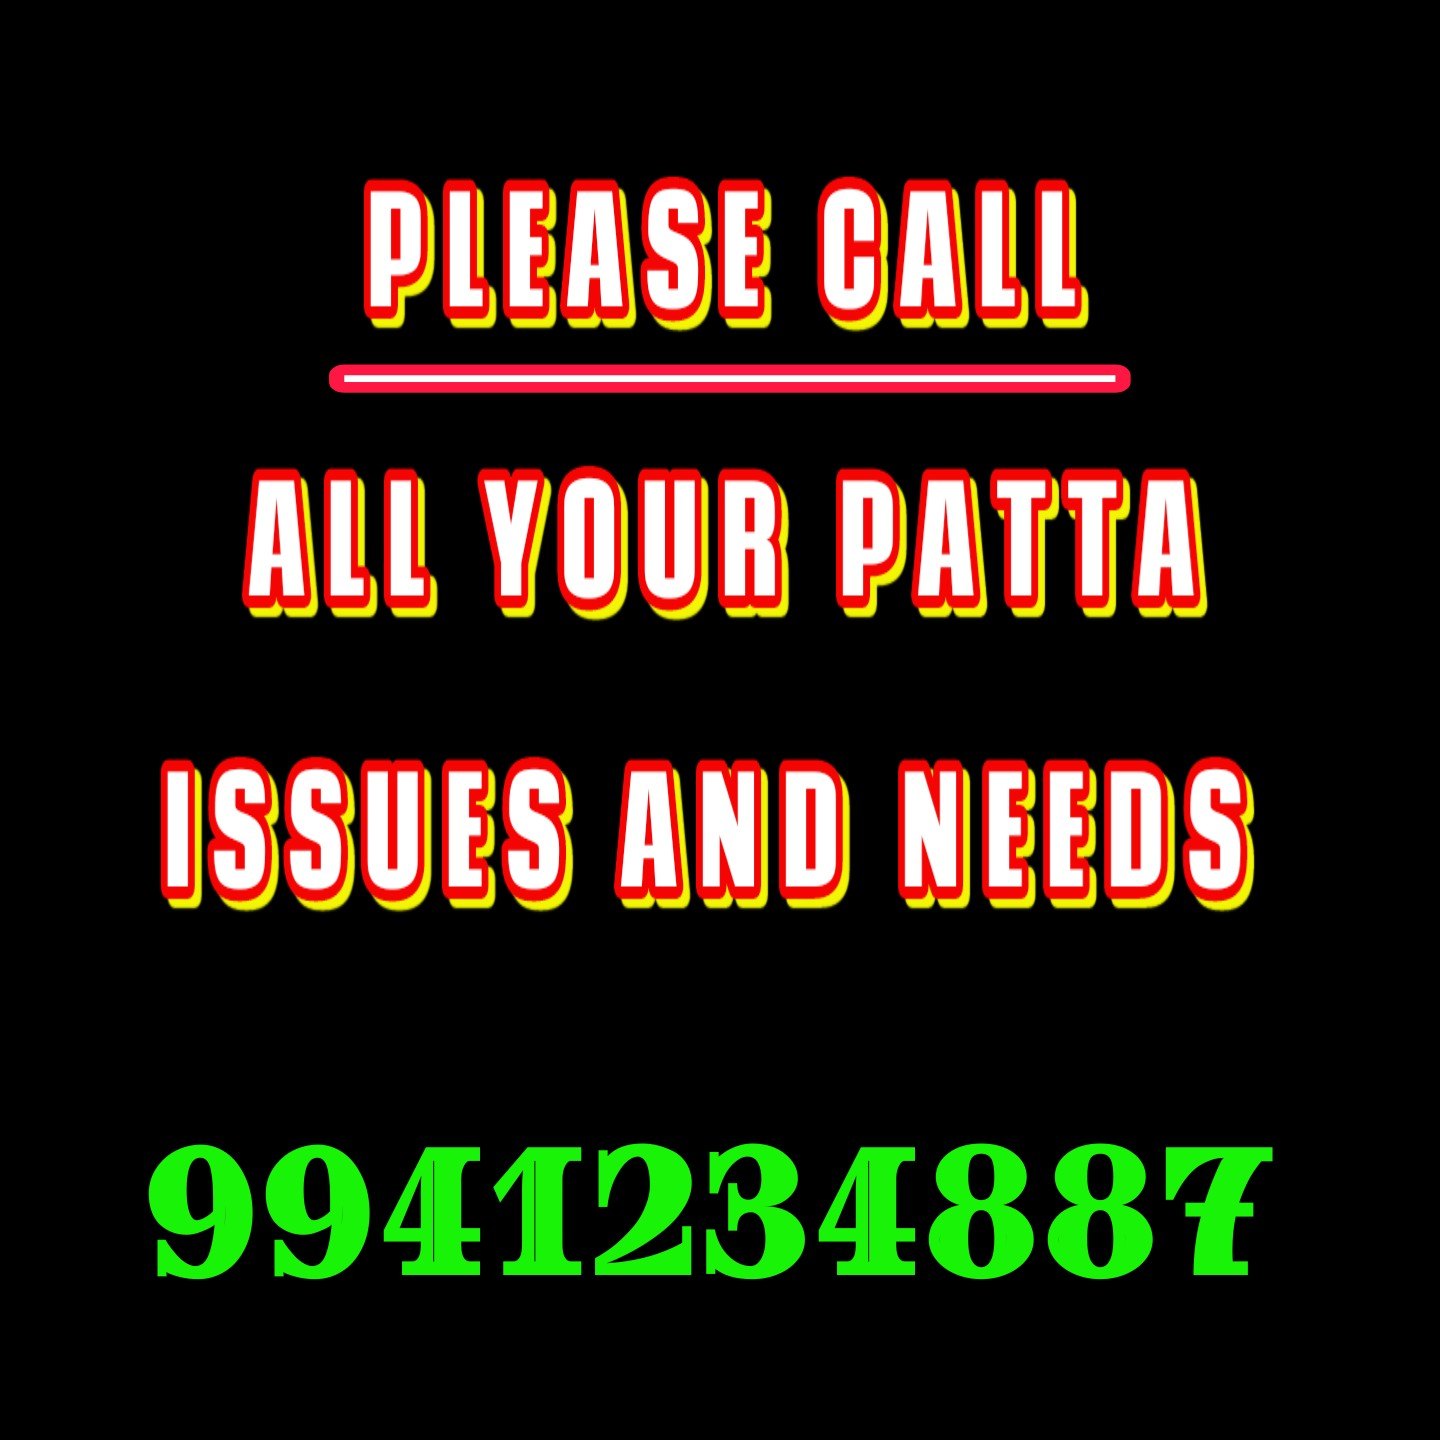 ALL AND ANY PATTA ISSUES,CALL 9941234887